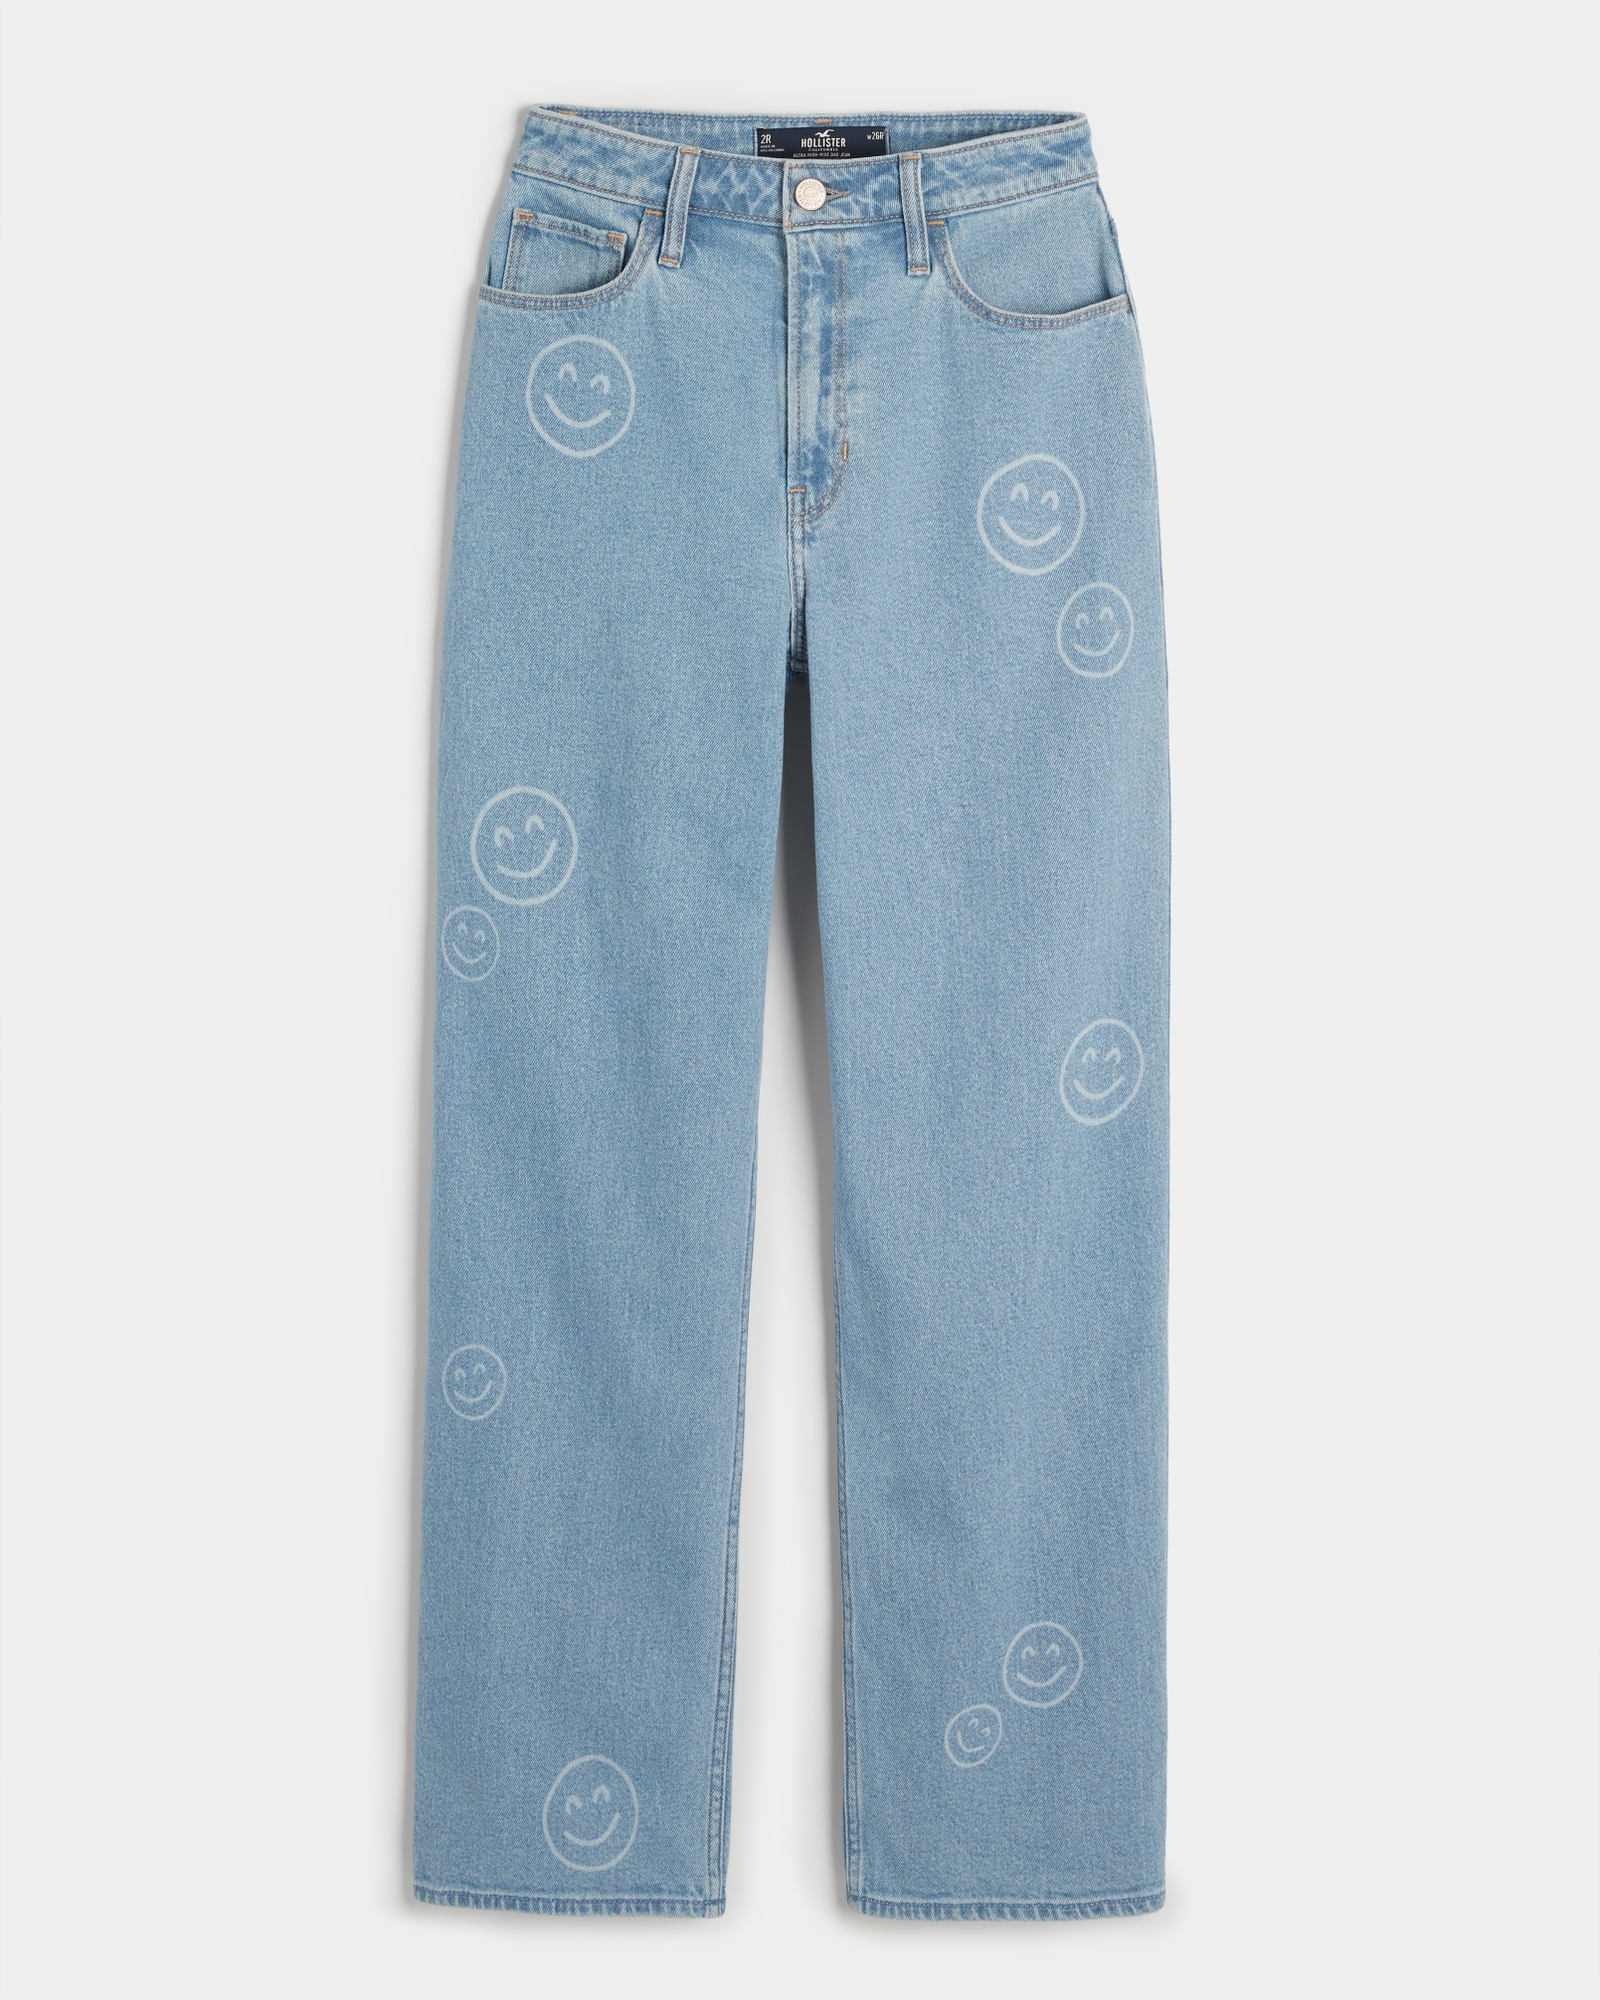 Hollister Co. - The 👖 you wear on 🔁: Paper-Bag Mom Jeans